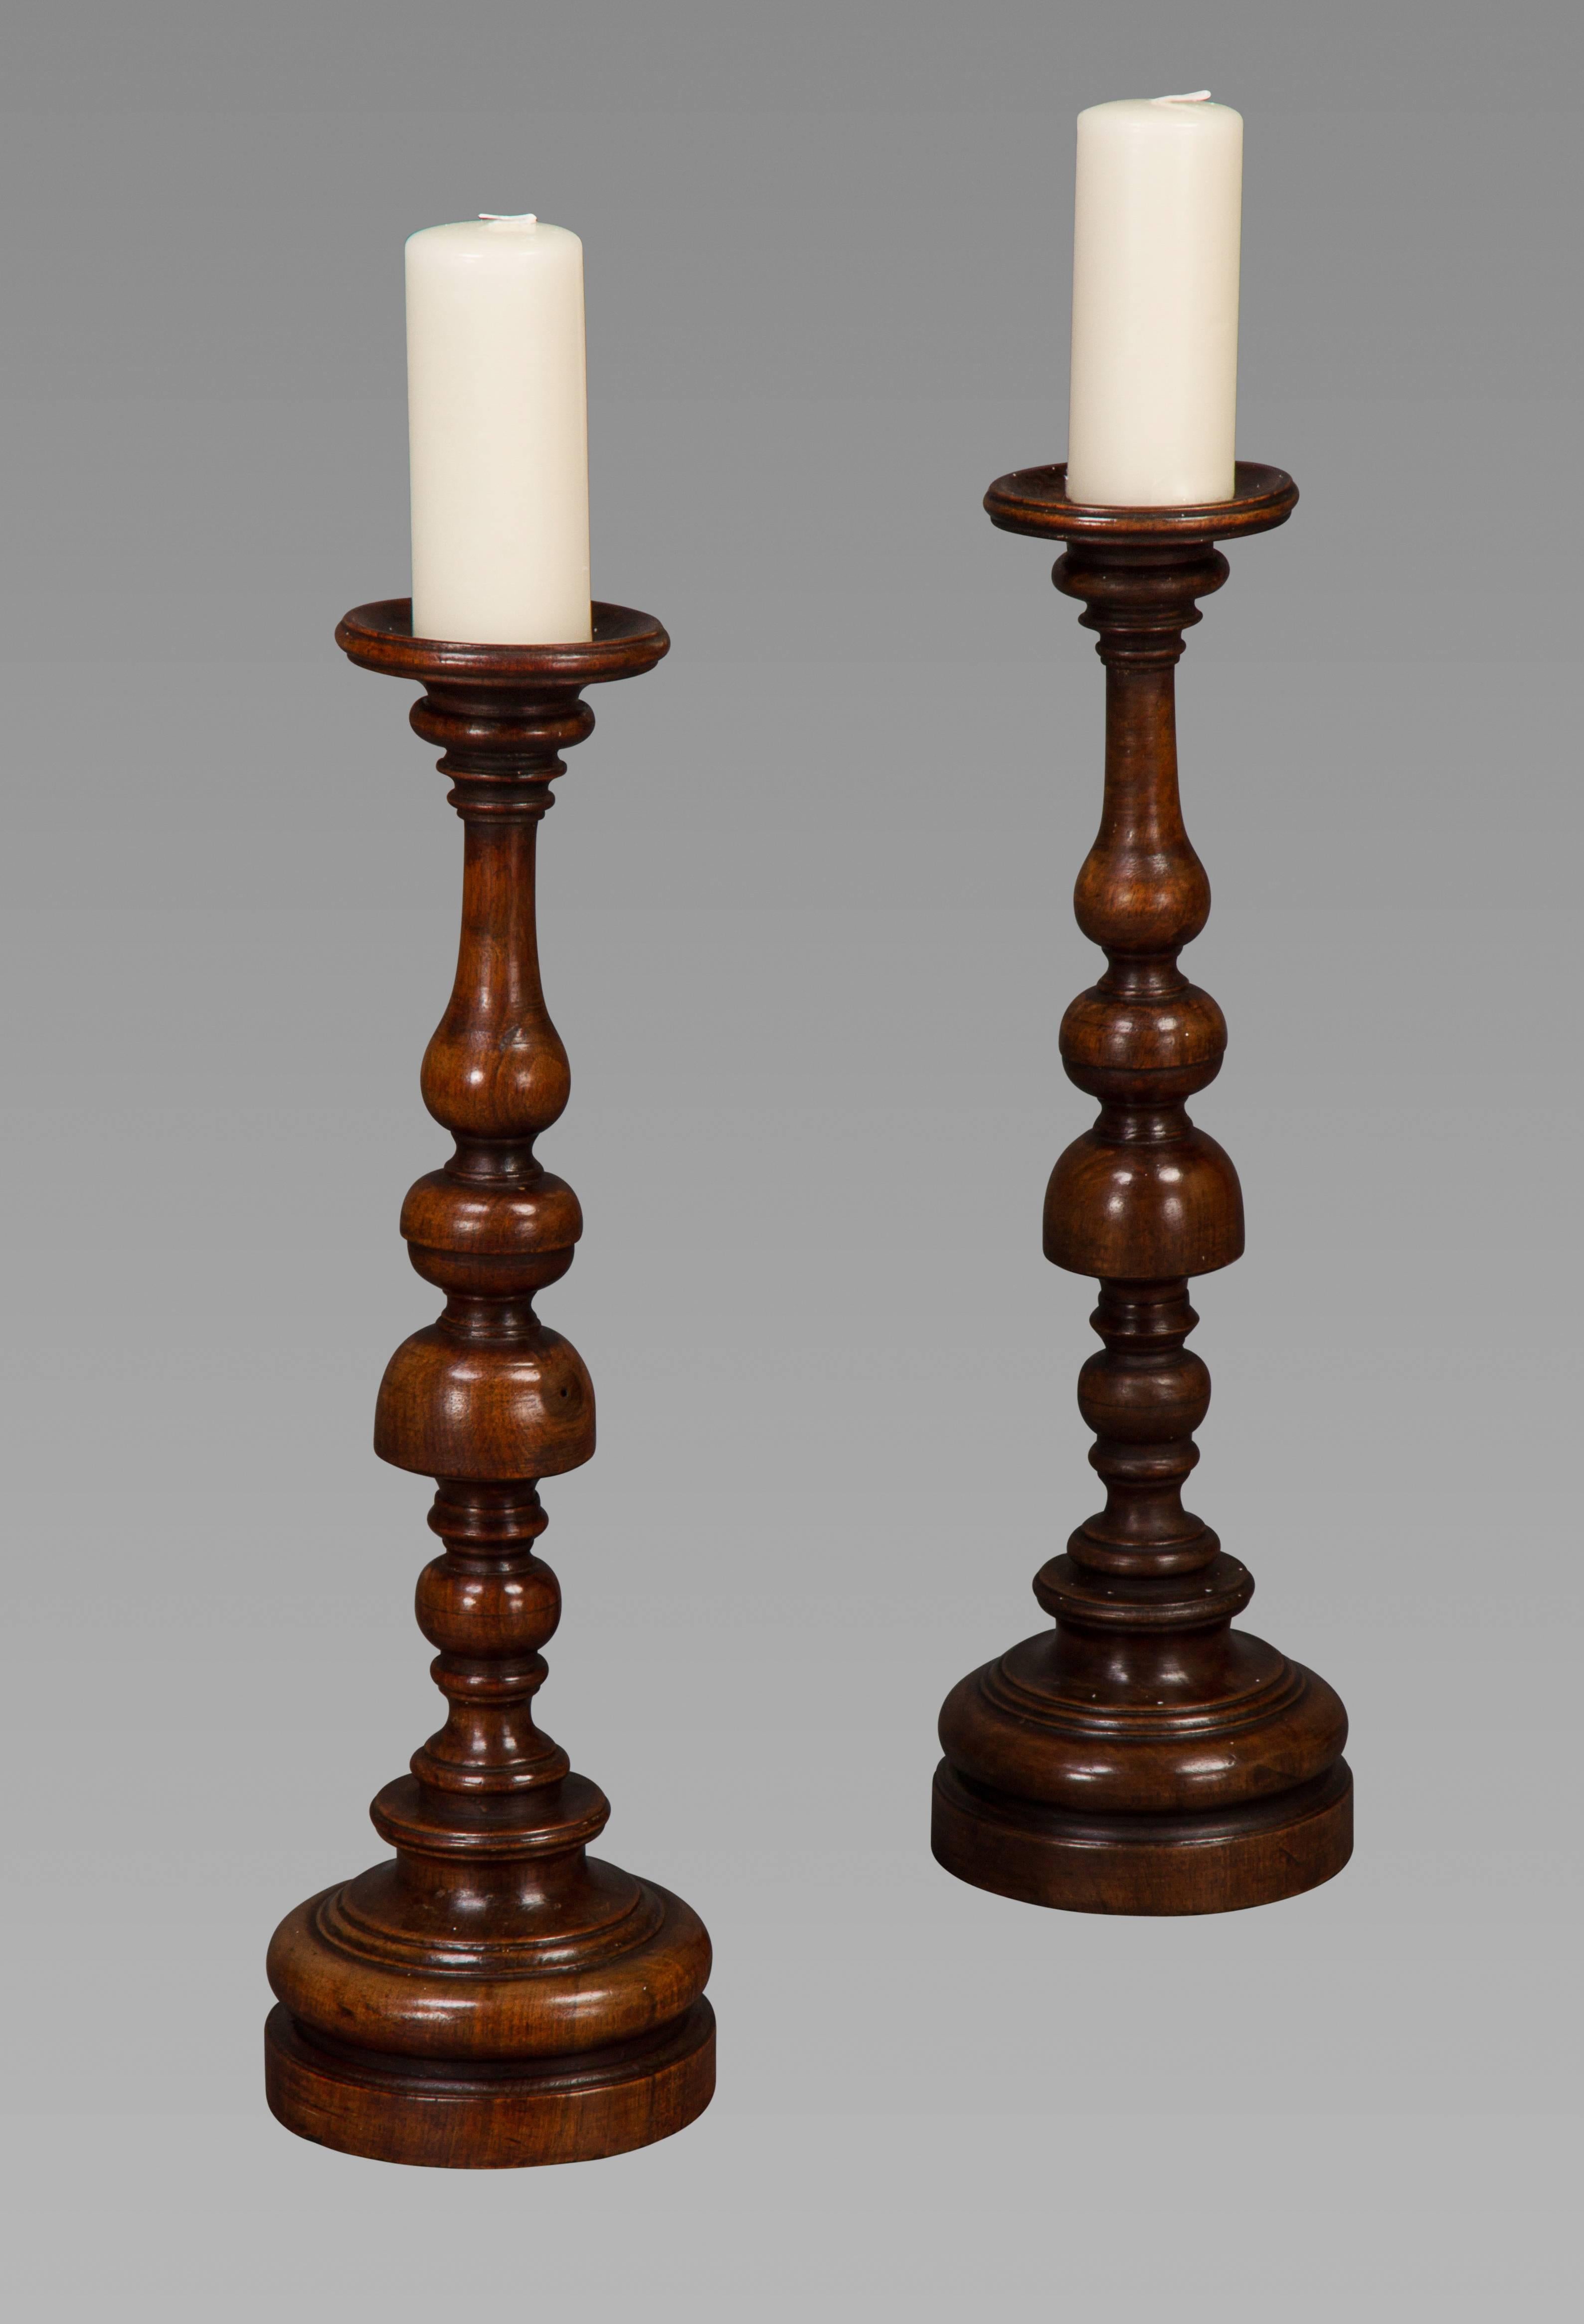 English Fine and Large Pair of Early 18th Century Walnut Pricket Candlesticks